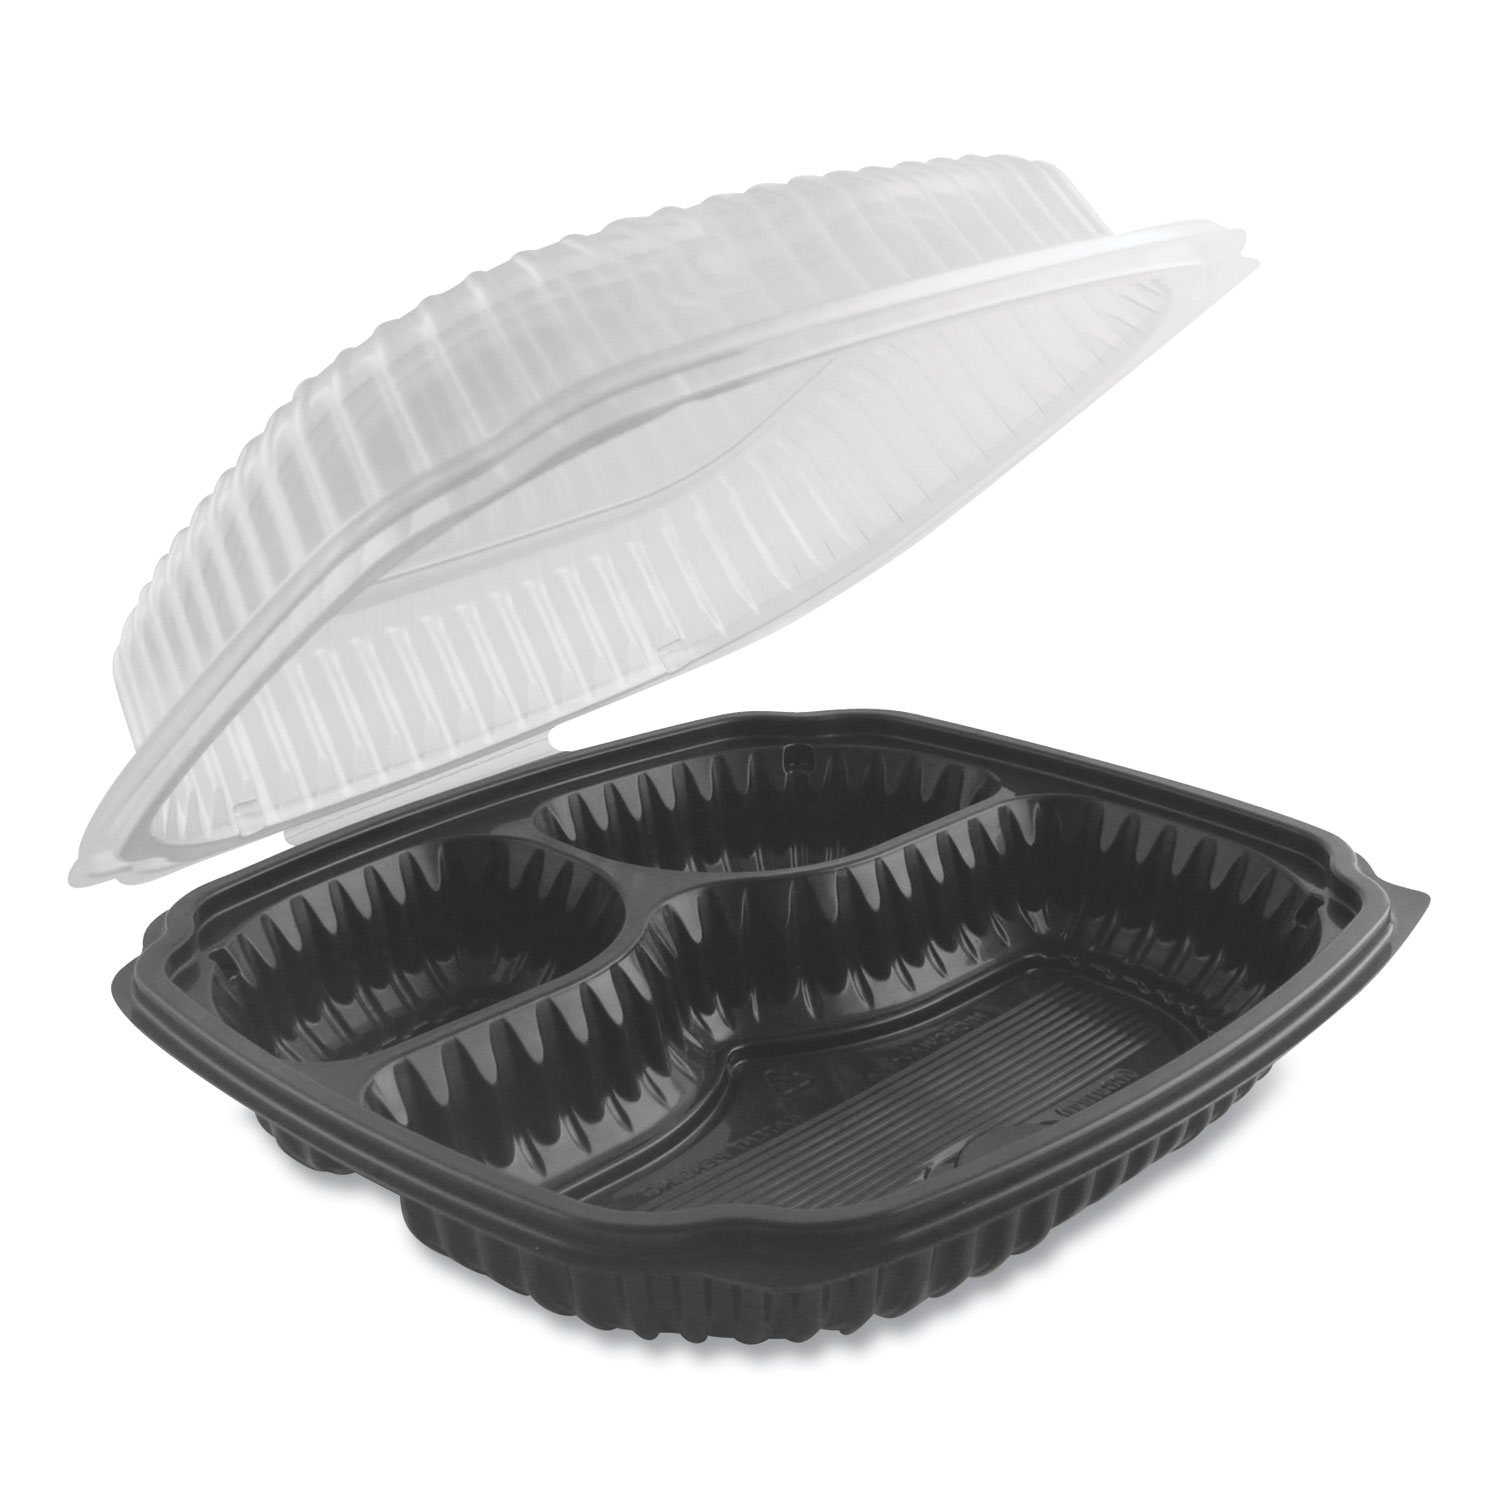  Anchor Packaging 4699931 Culinary Lites Microwavable 3-Compartment Container, 20 oz/5 oz/ 5 oz, 9 x 9 x 3.01, Clear/Black, 100/Carton (ANZ4699931) 